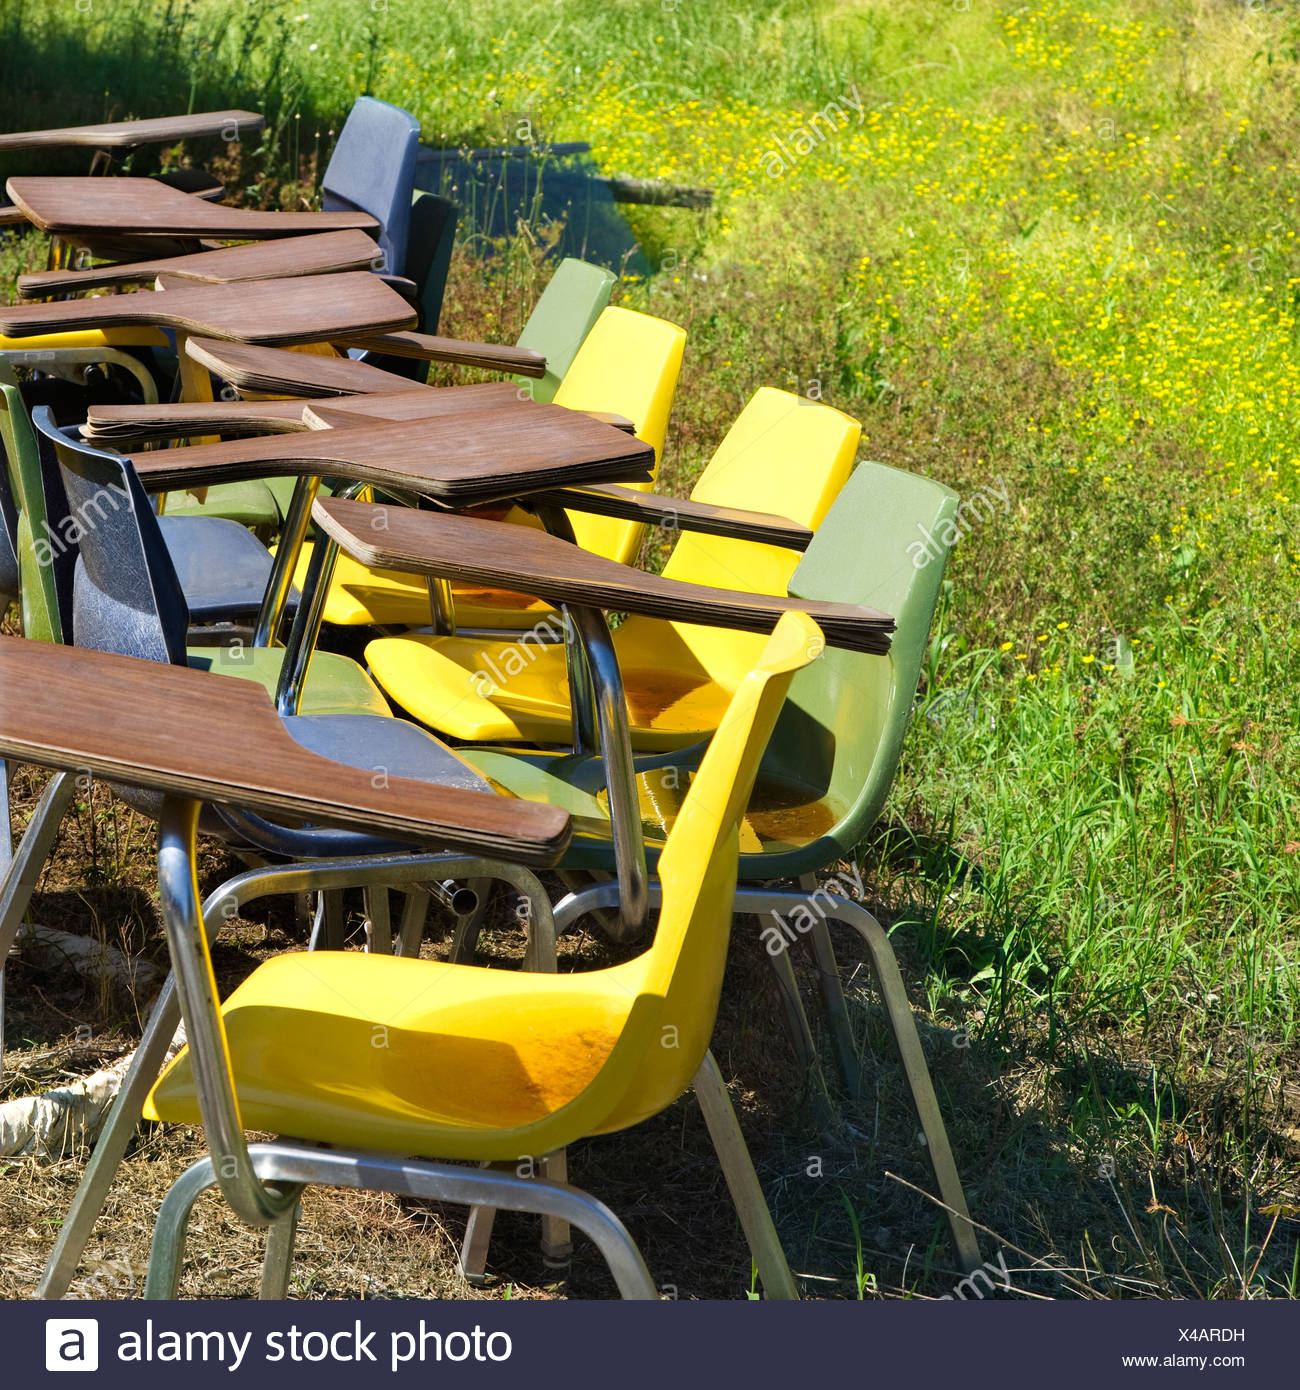 Old School Chairs In Grassy Field Stock Photo 278062445 Alamy